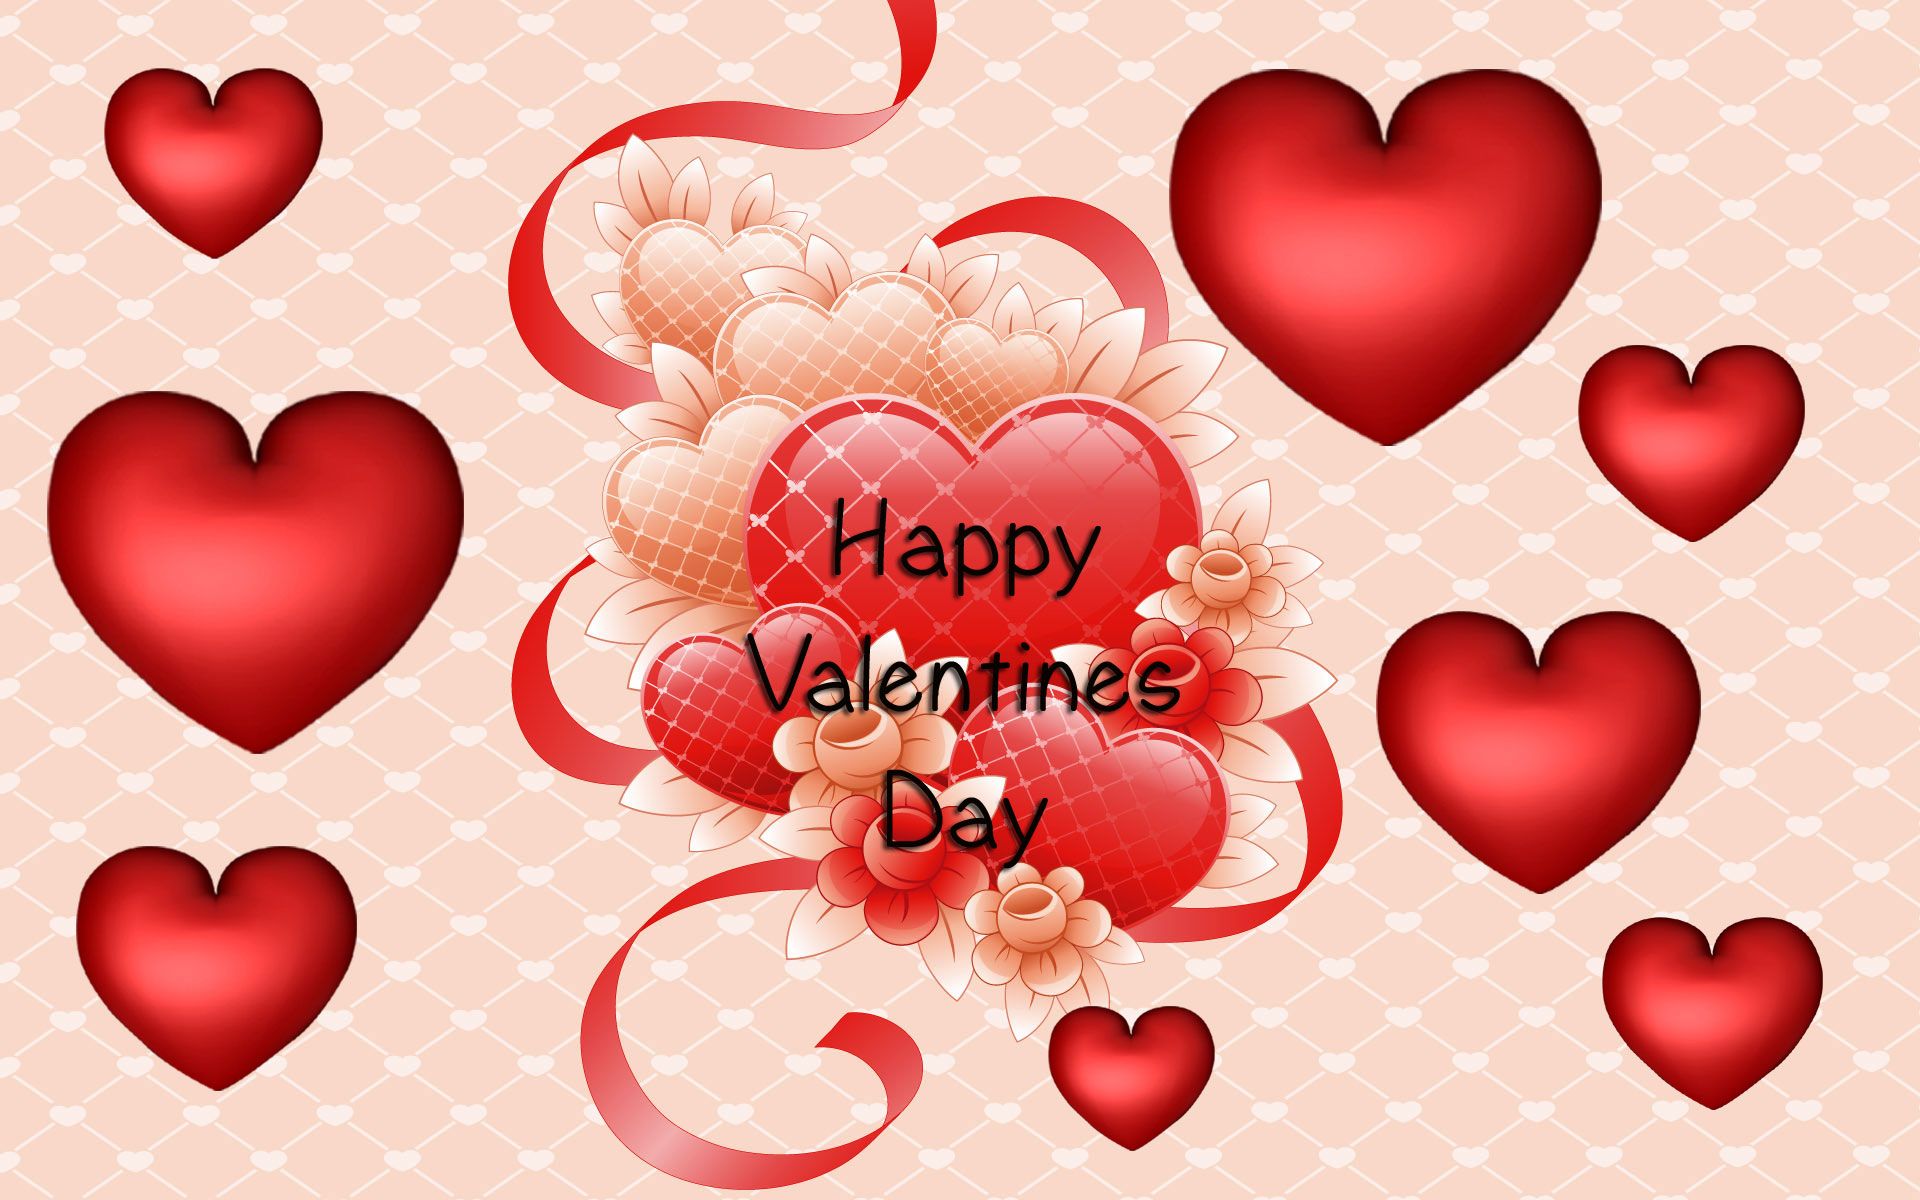 Valentines Wallpapers Free | Wallpapers, Backgrounds, Images, Art ...